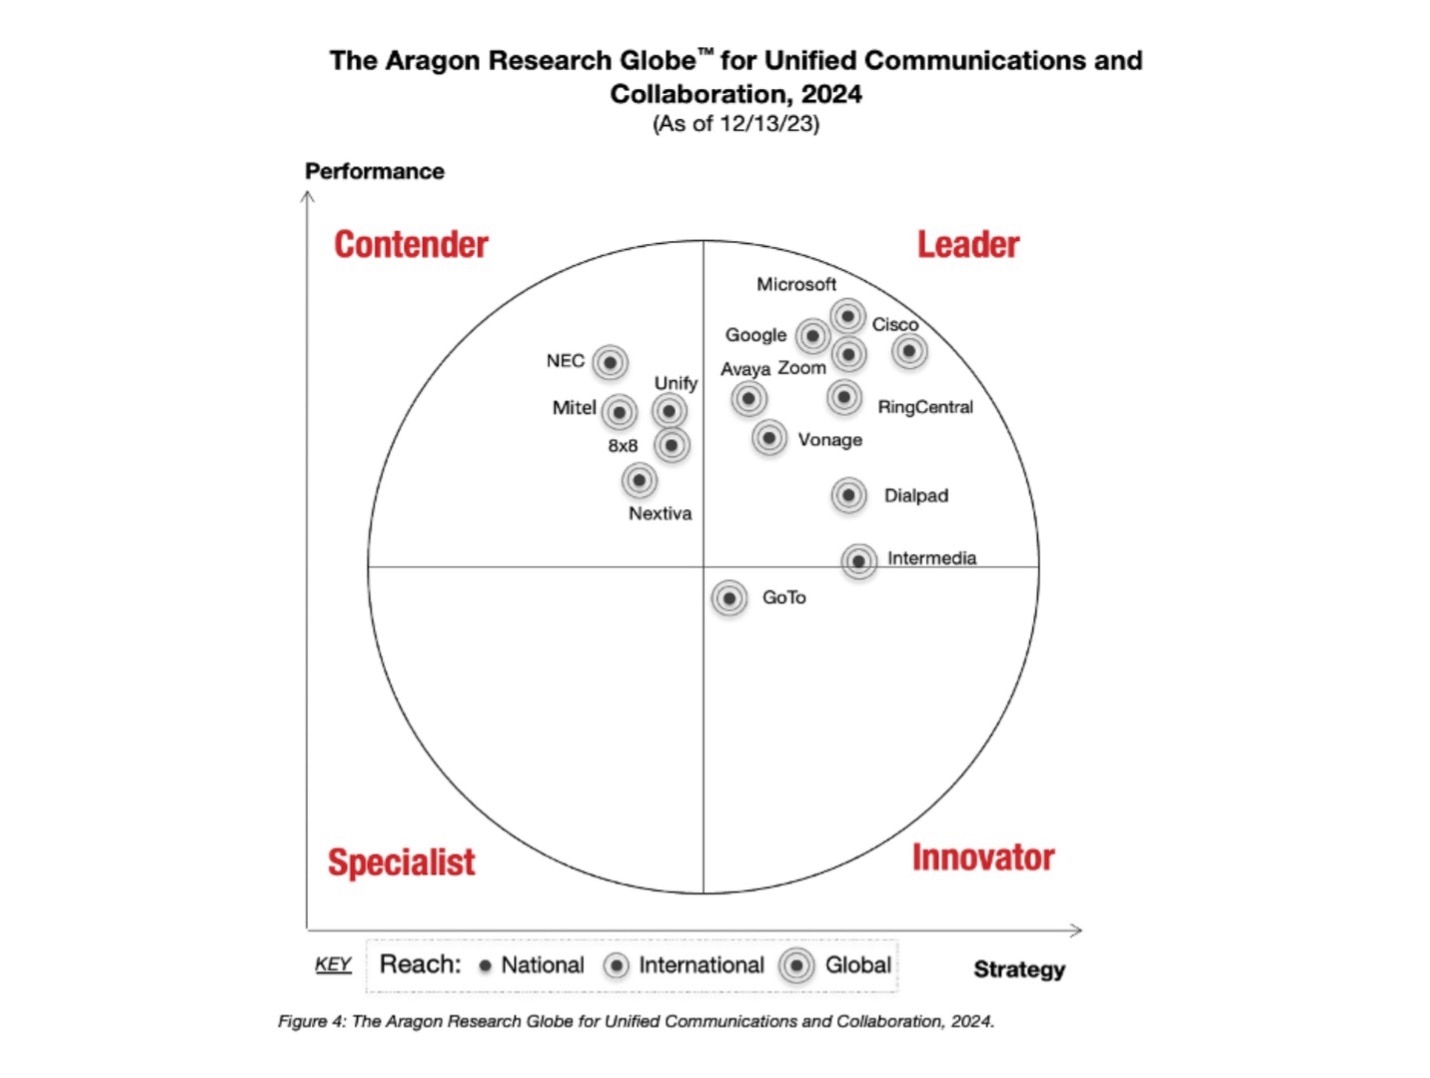 Aragon Research Globe​™ for UCC, 2024 ​place​d​ Webex as a leader for unified communications and collaboration.